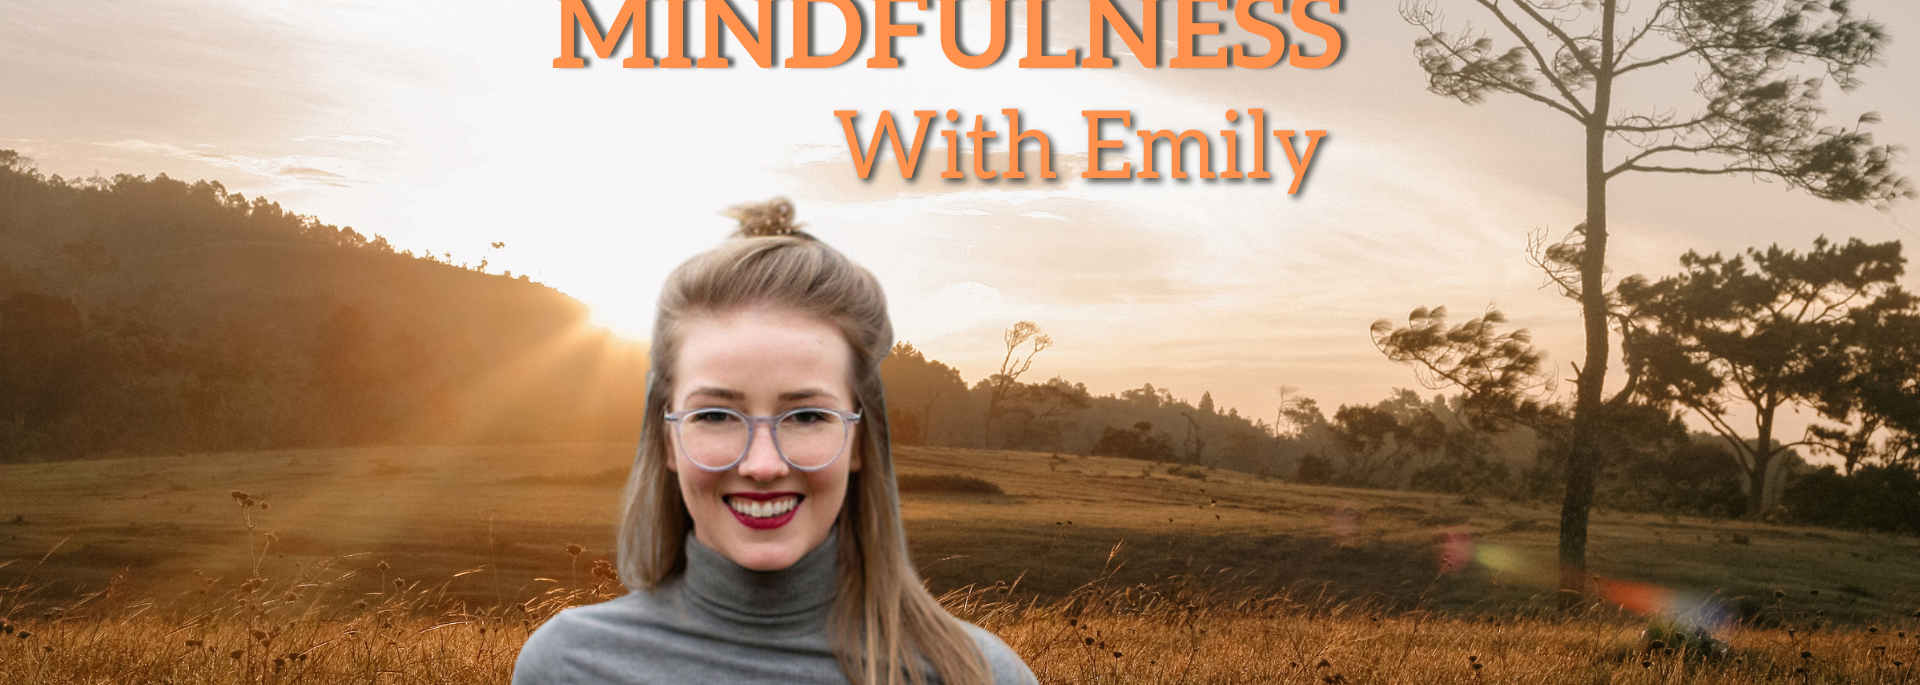 Mindfulness With Emily